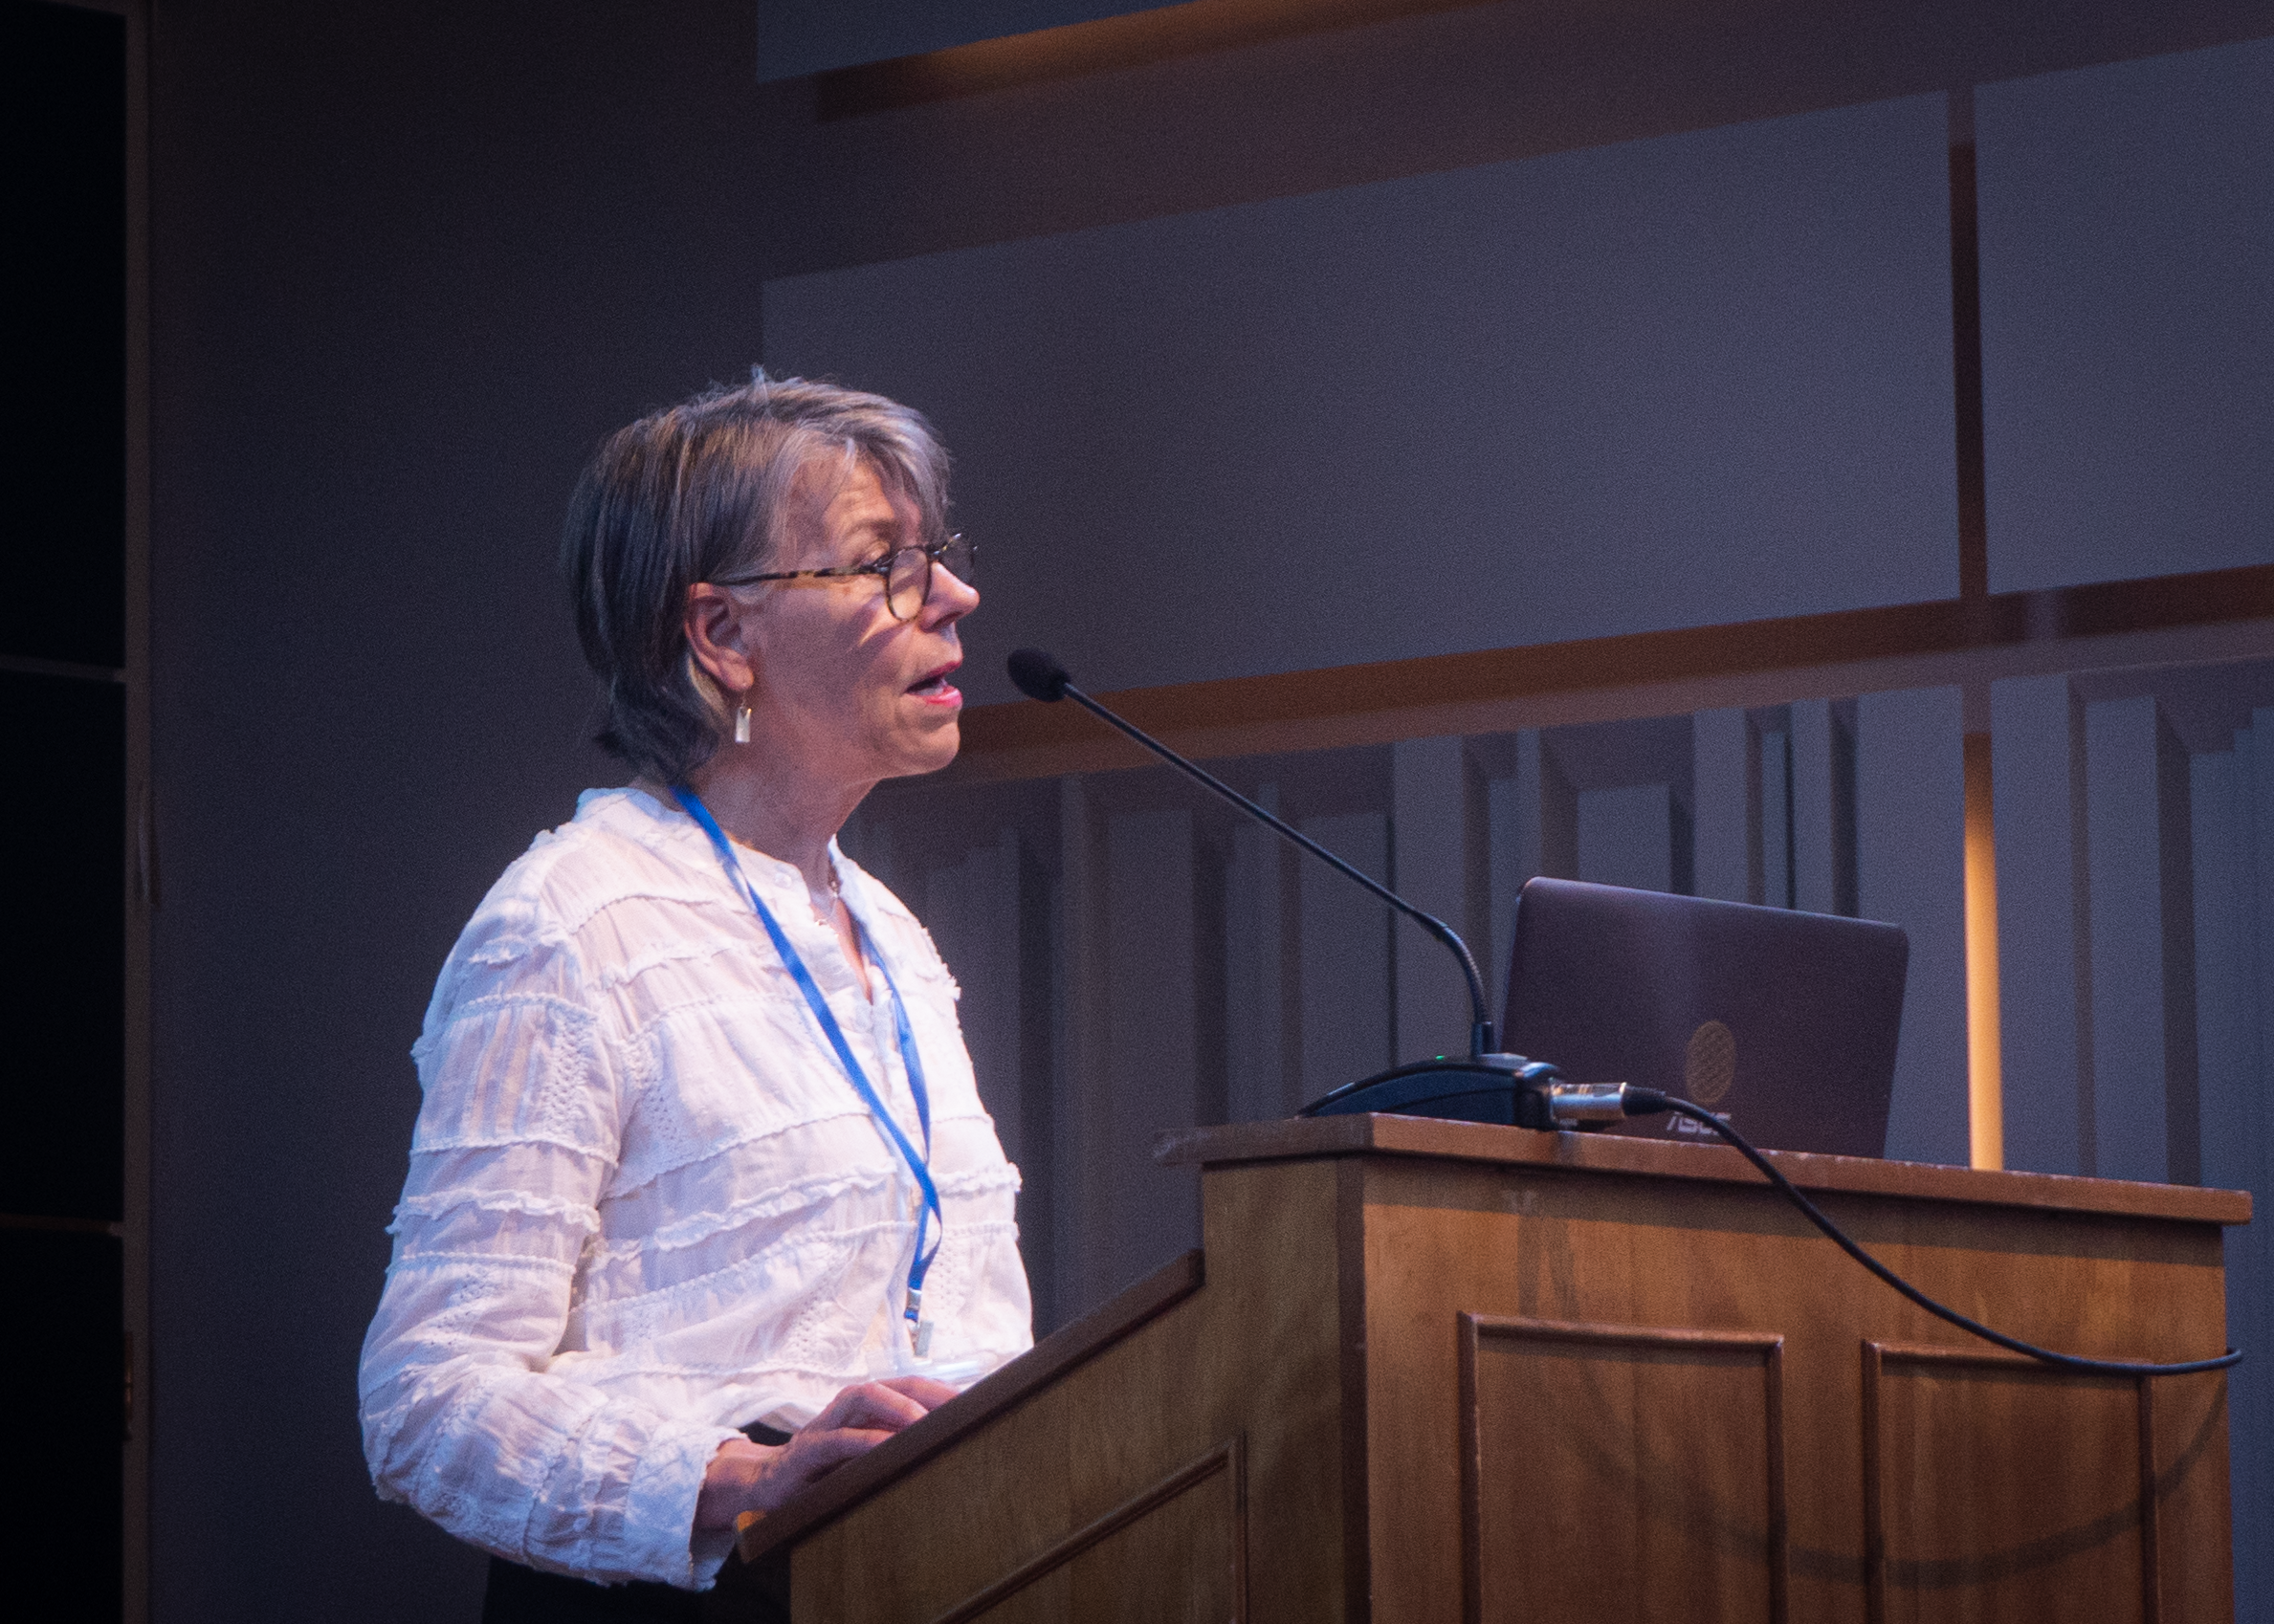 Catherine Delong, CM-Th, presenting "Music as Medicine at the End of Life" at IAMM 2022.